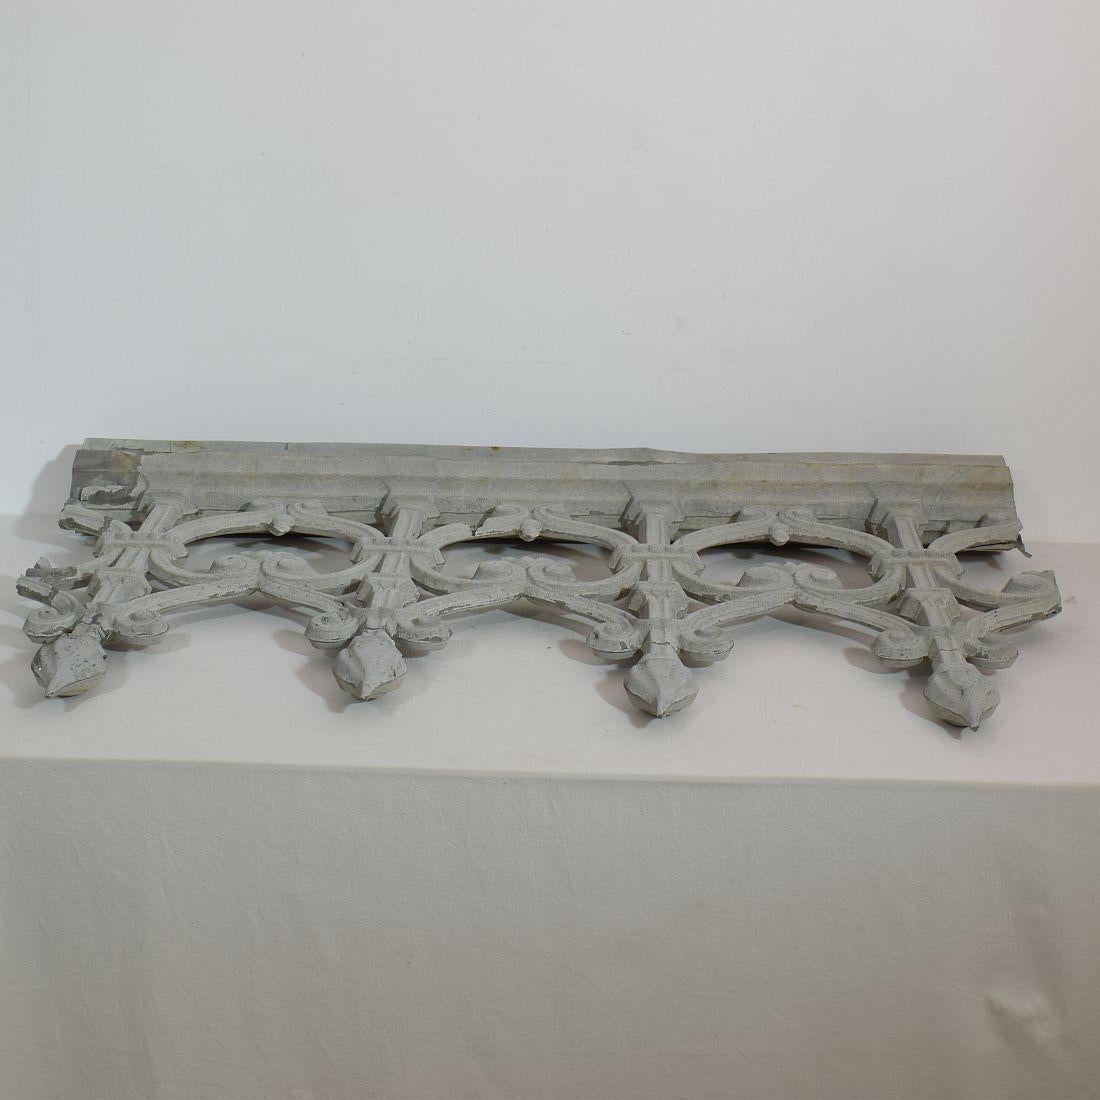 Pair of 19th Century French Zinc Architectural Roof Ornaments or Finials 14